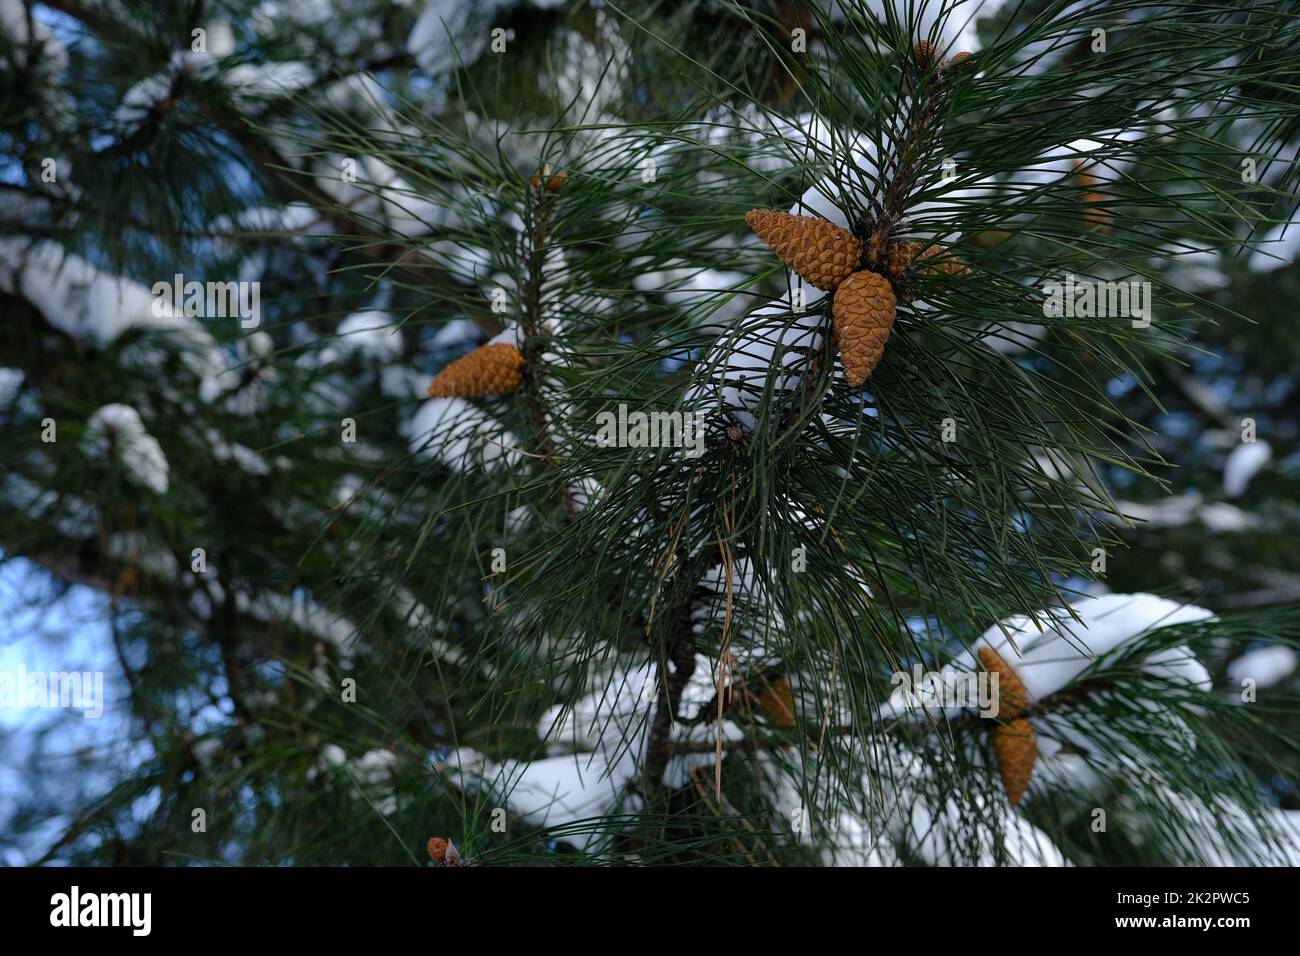 spruce with cones in winter time under snow on a sun shiny day Stock Photo